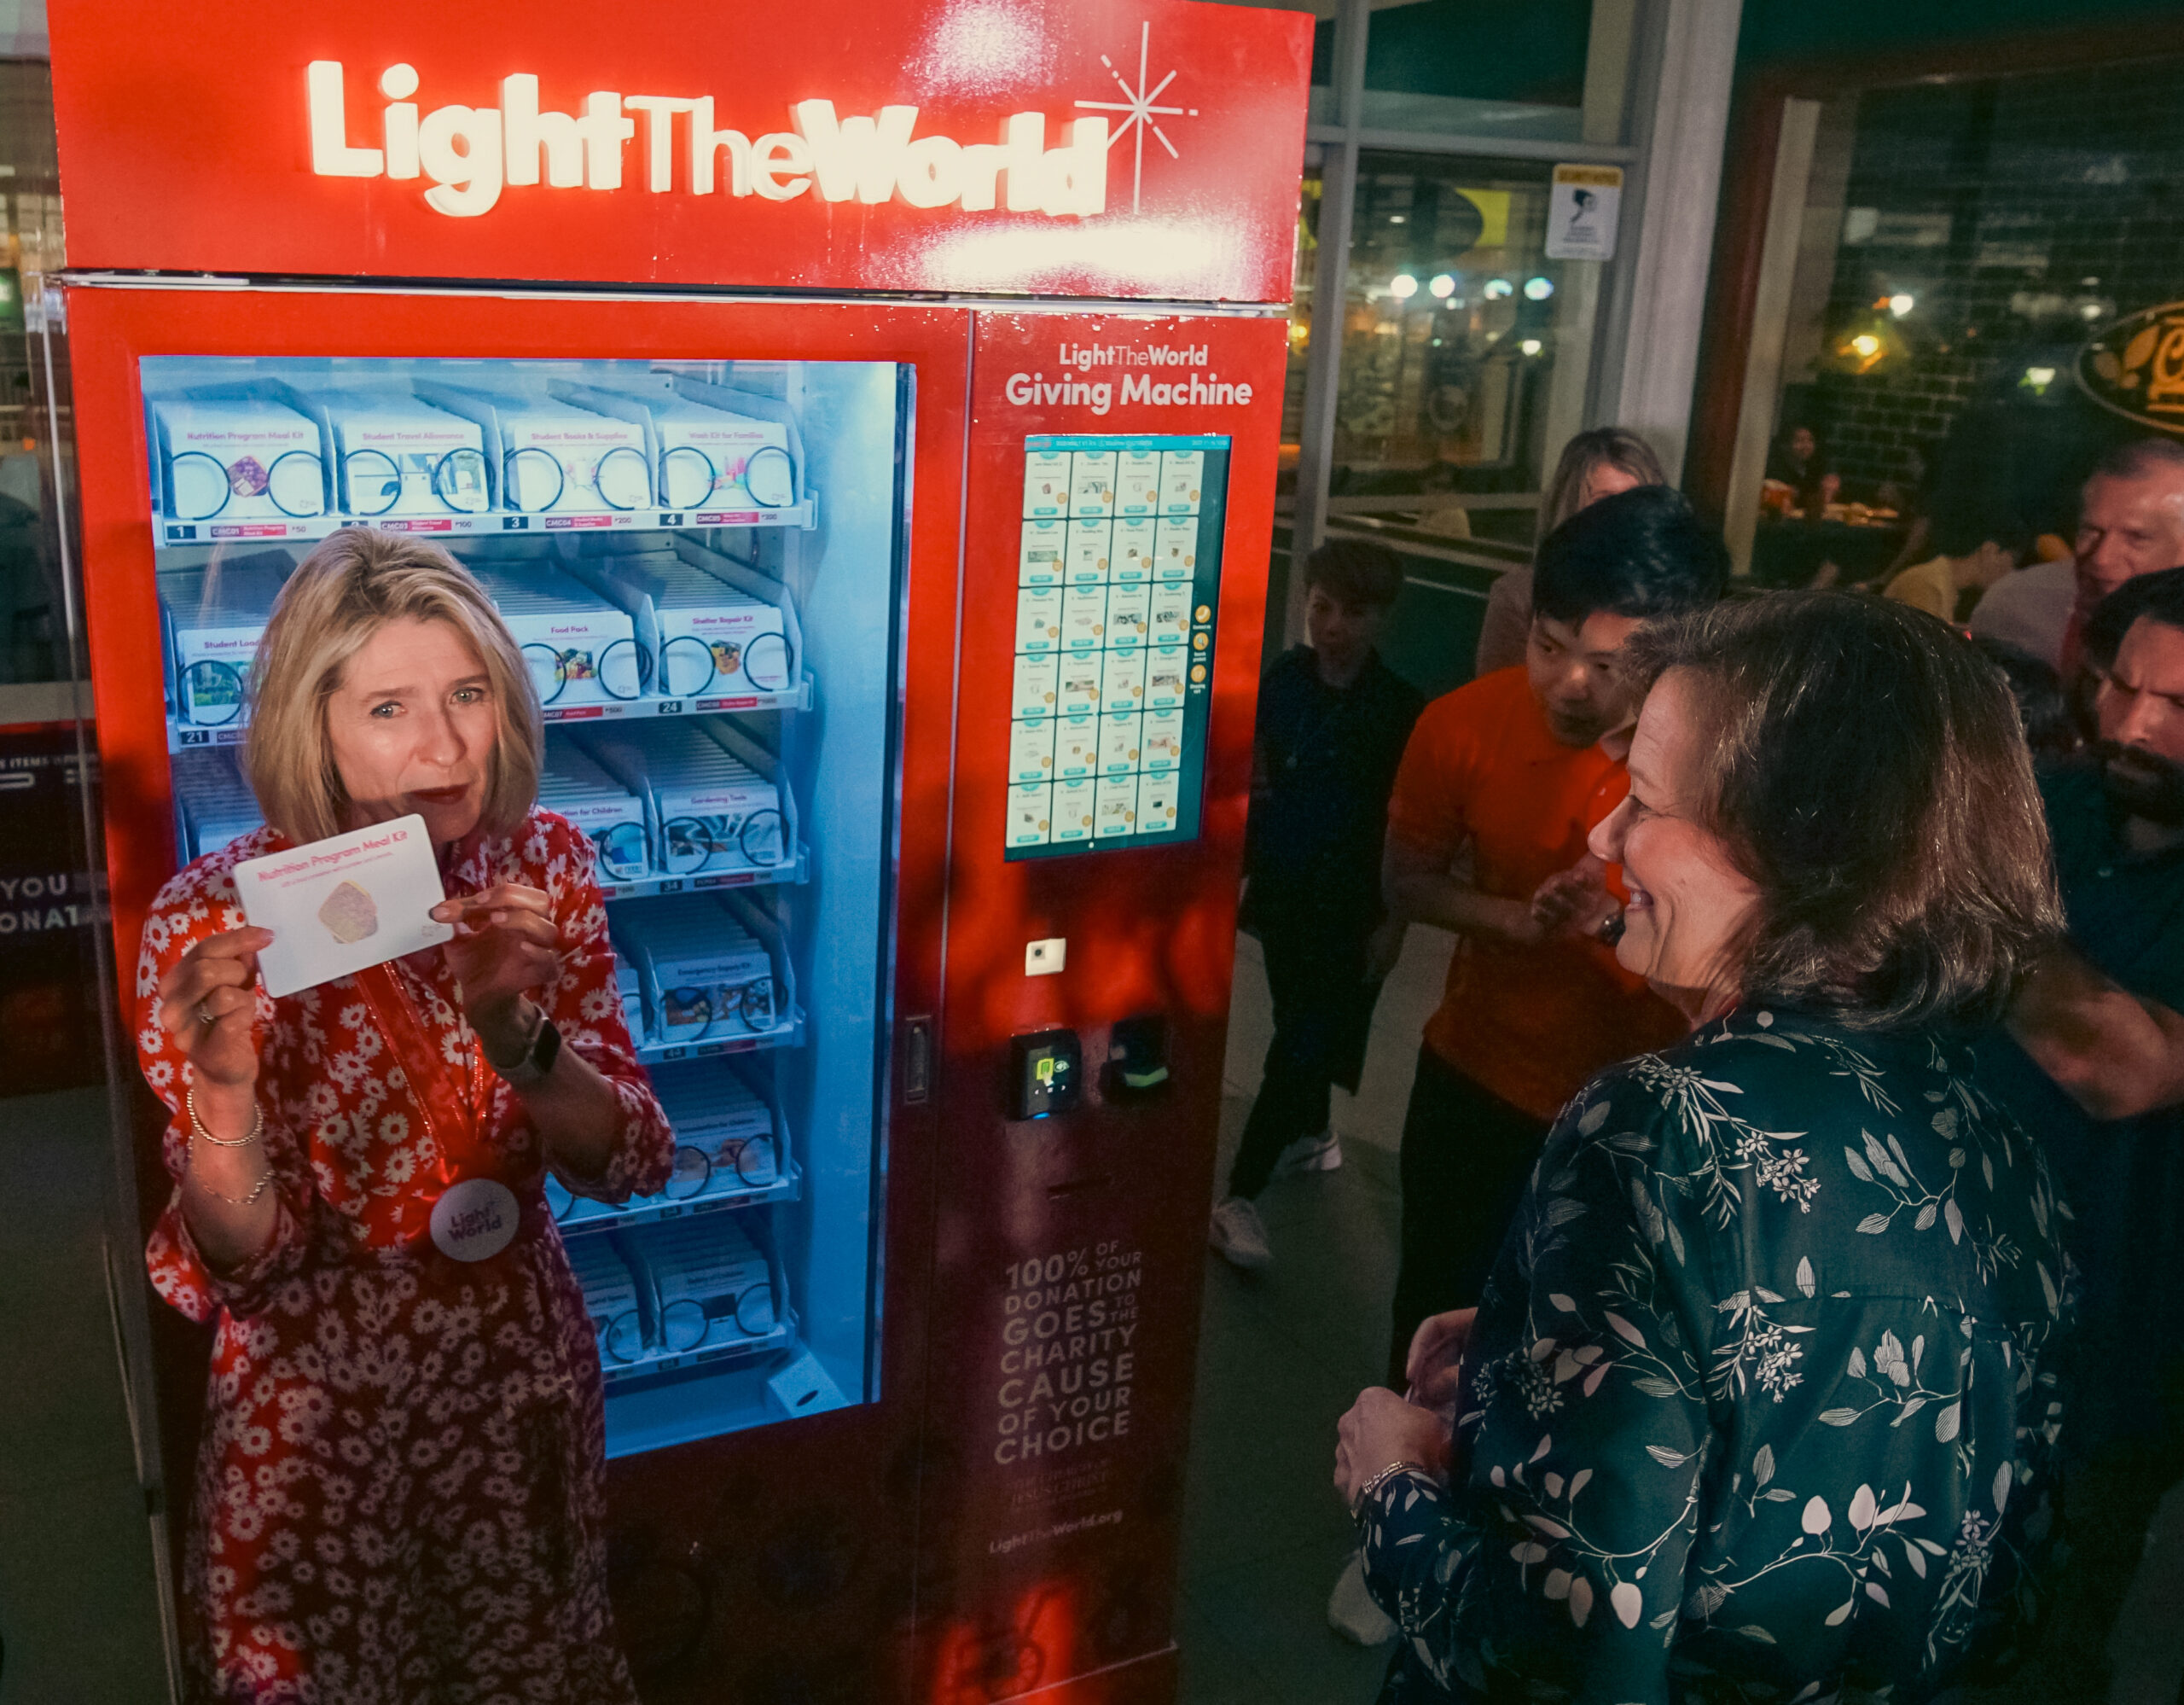 The Church of Jesus Christ of the Latter-day Saints Launch Light the World Giving Machines